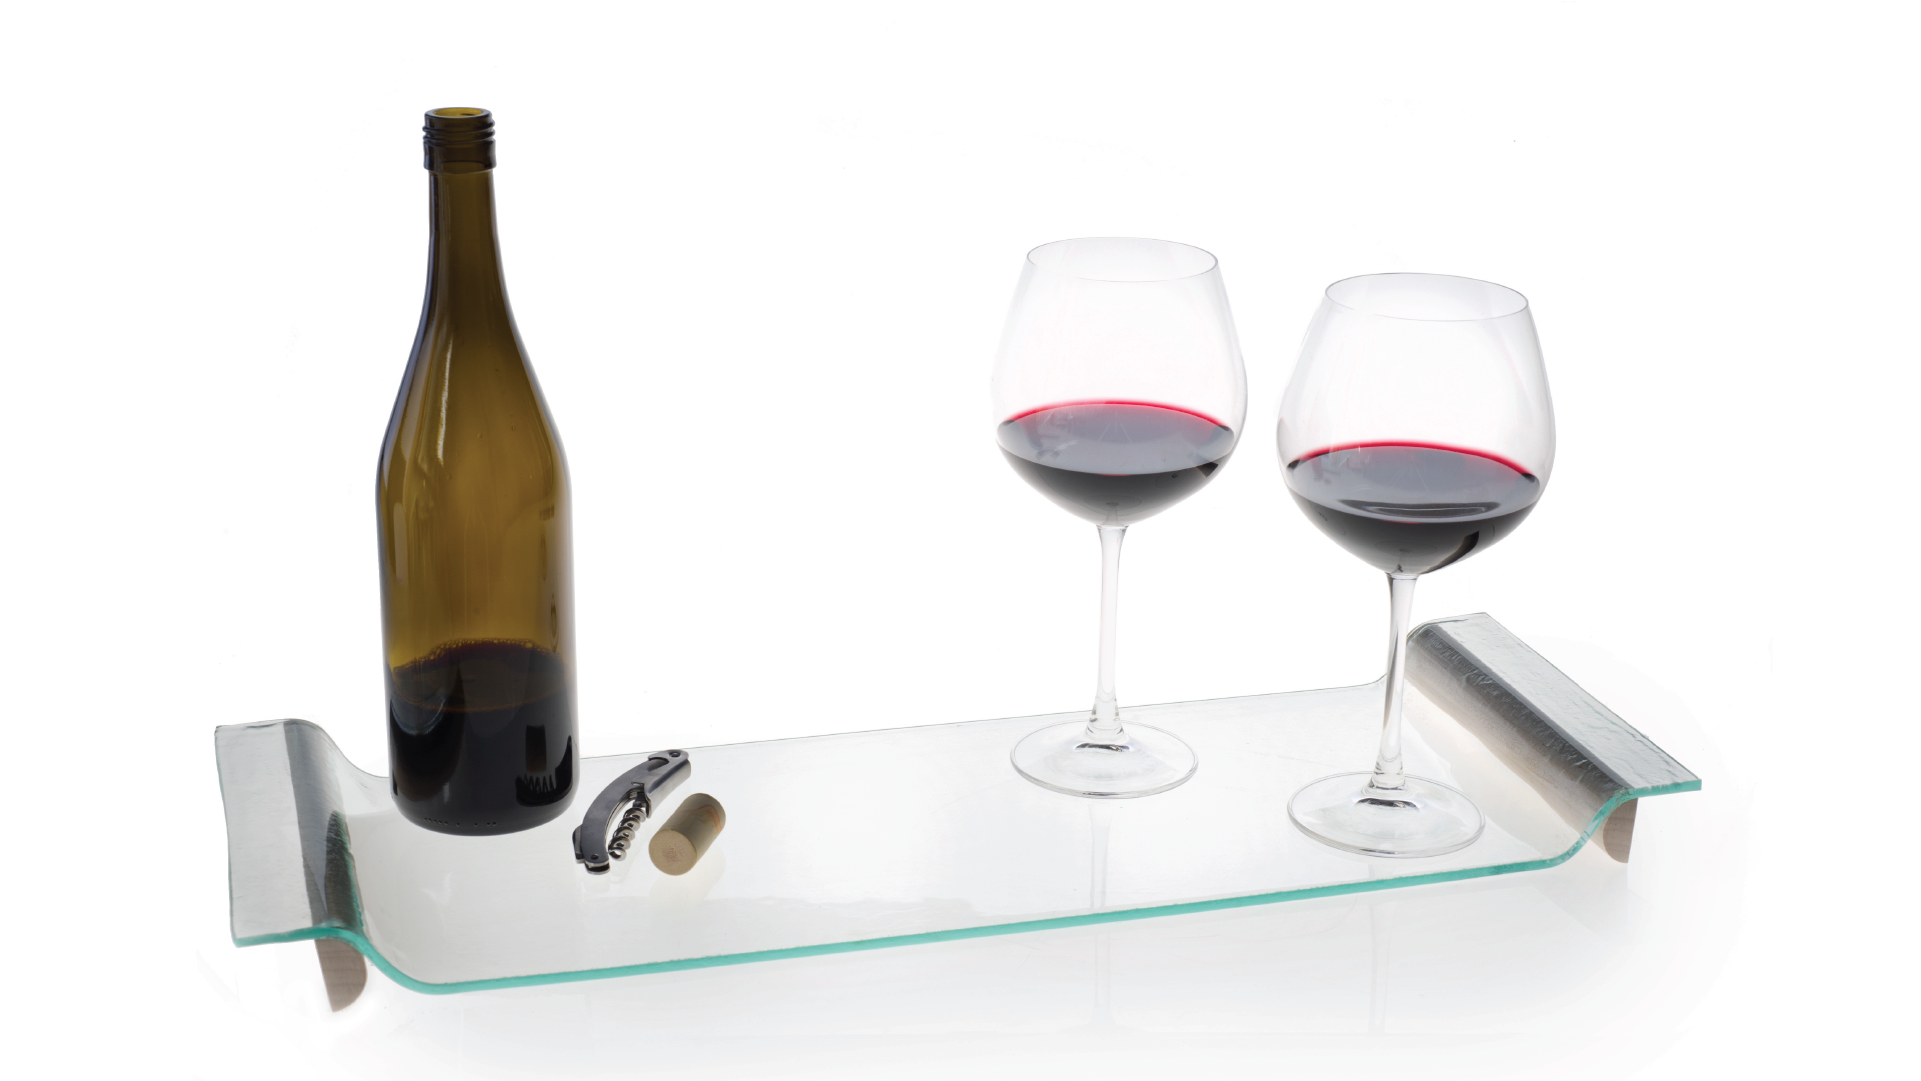 Glass tray with half dowels on each side as a feet. Bottle of wine, 2 cups of wines and a bottle opener placed on the top of the tray.